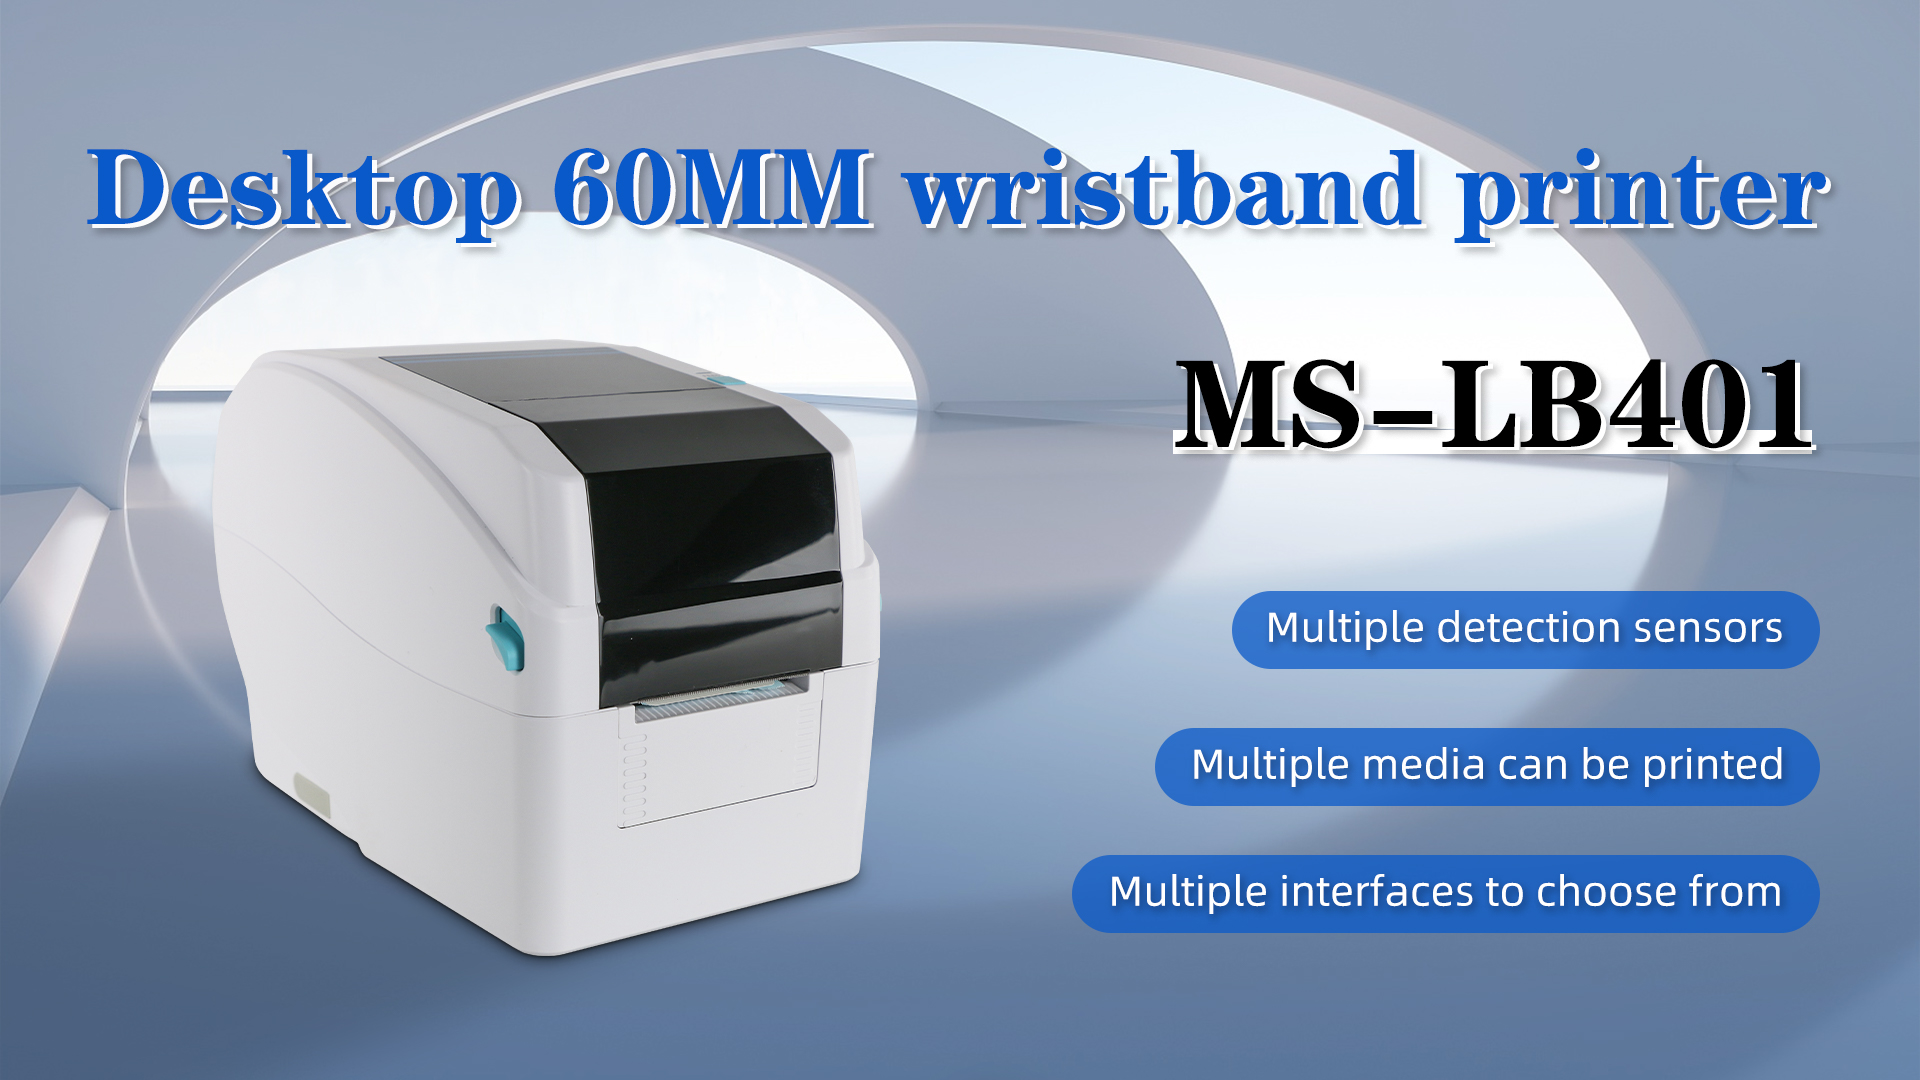 The product characteristics and application areas of MASUNG MS-LB401